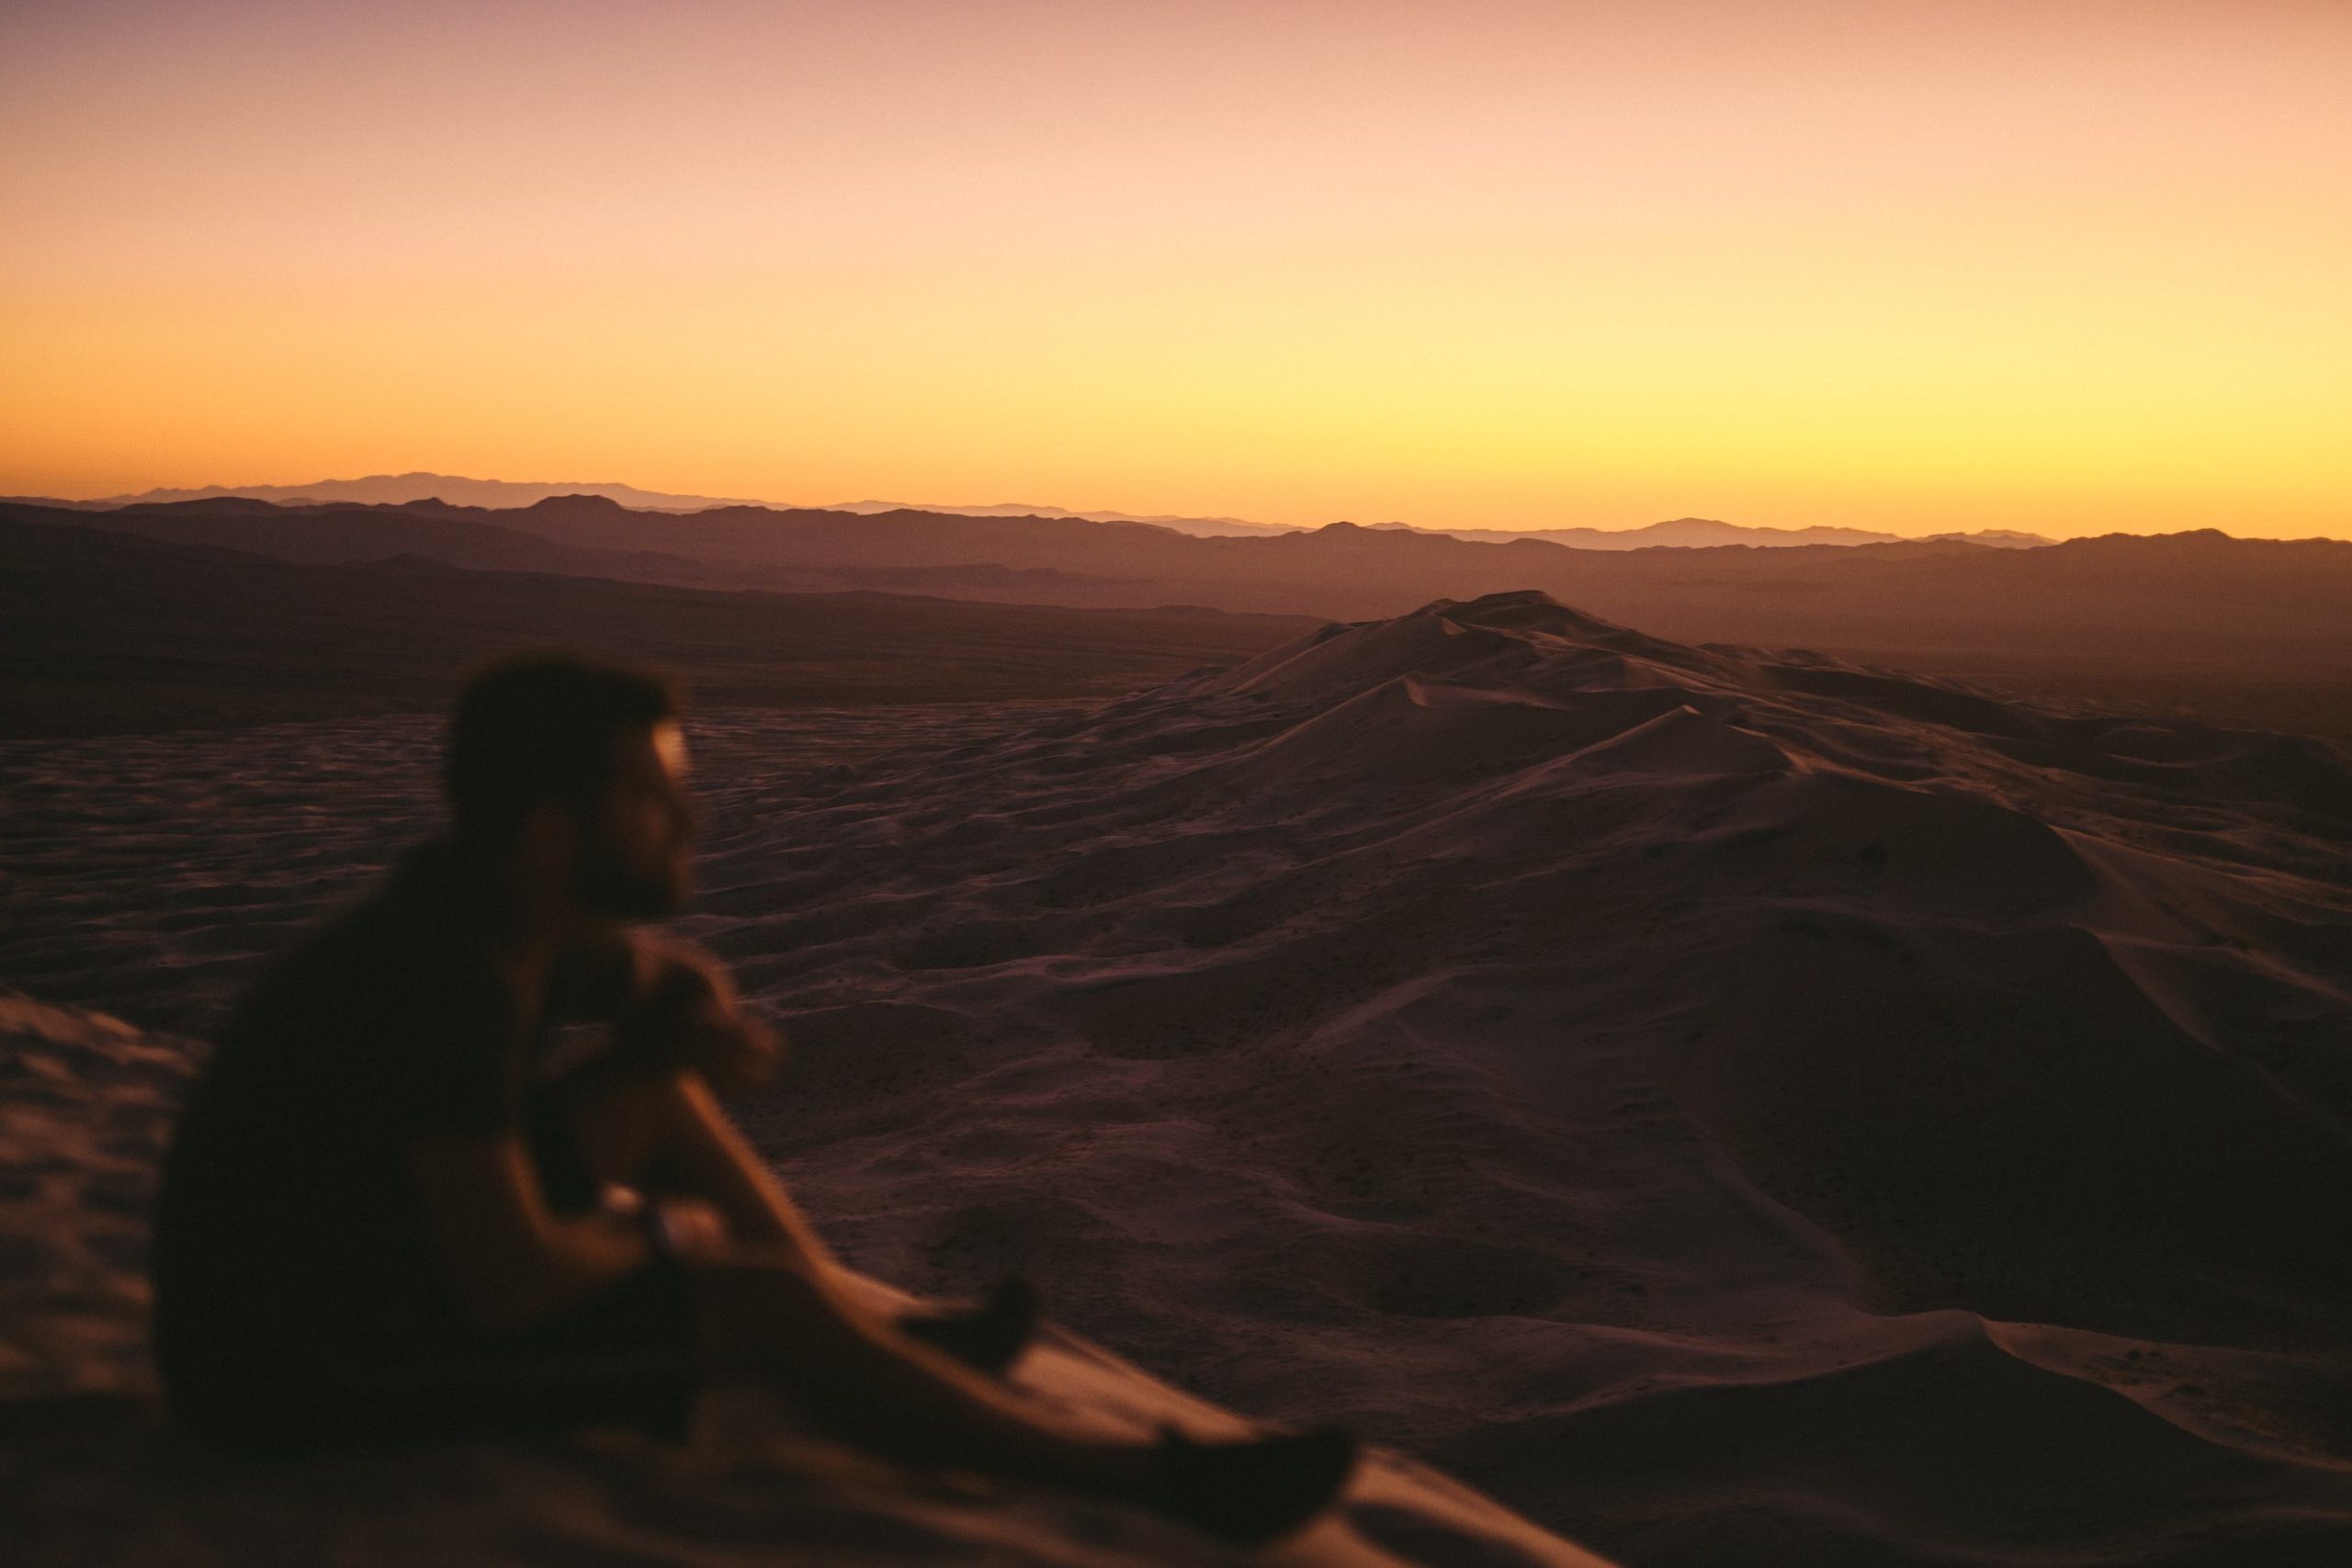 Blurry image of a bearded man sitting on a sandy cliff